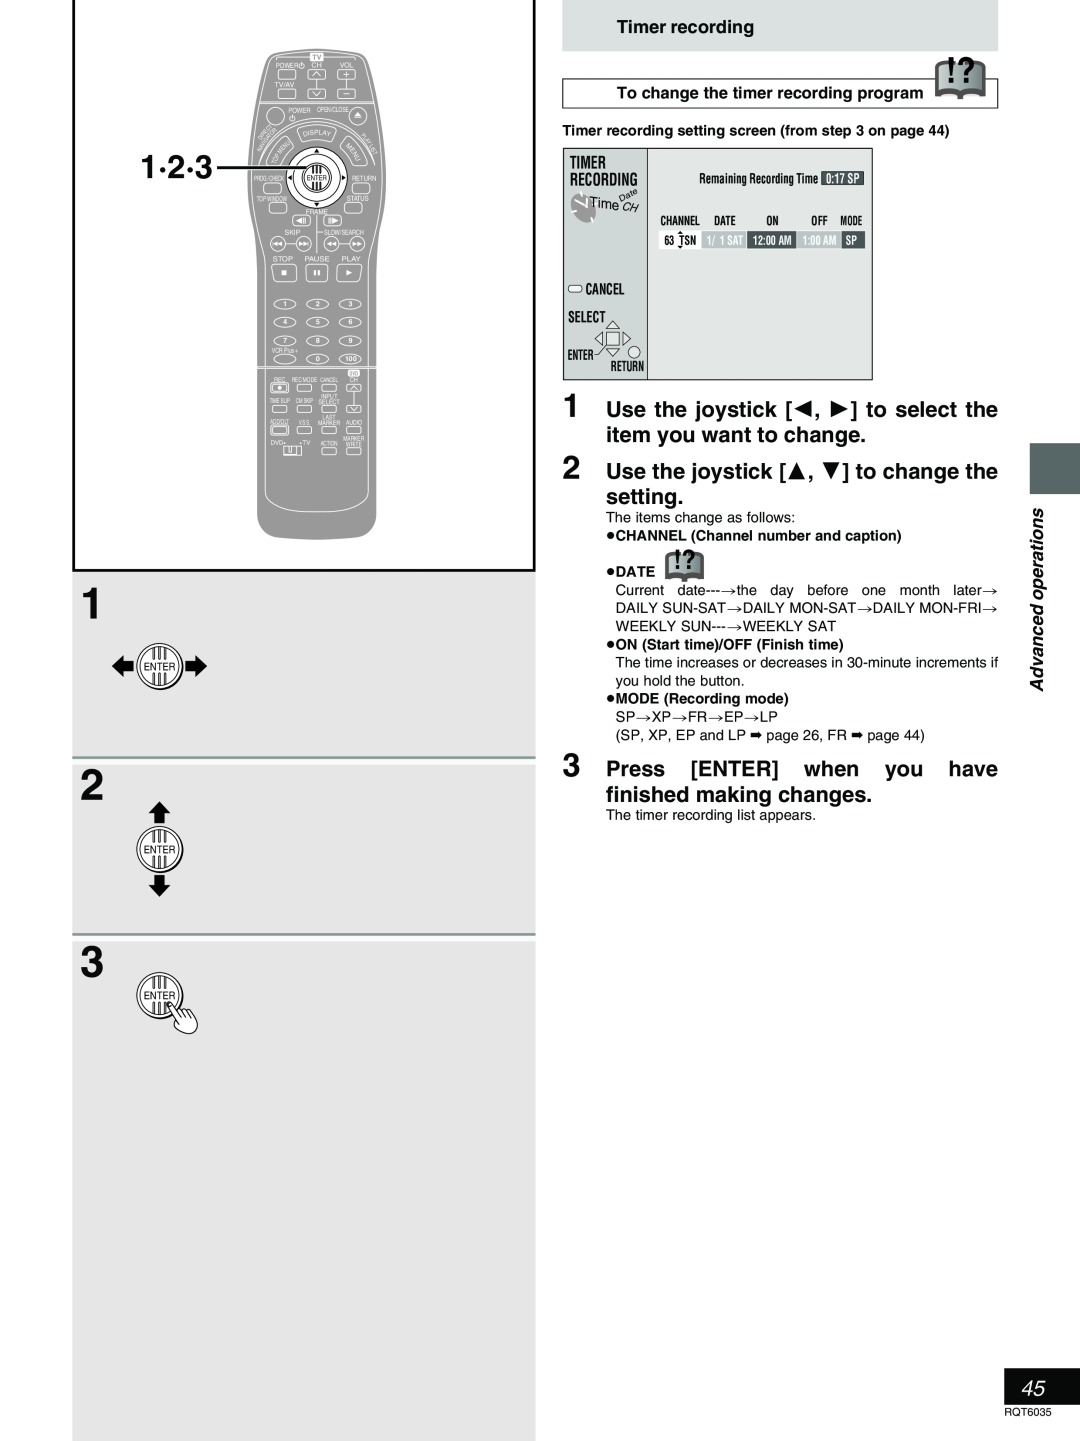 Panasonic DMR-E20 1·2·3, Use the joystick 2, 1 to select the item you want to change, Timer recording, Advanced operations 